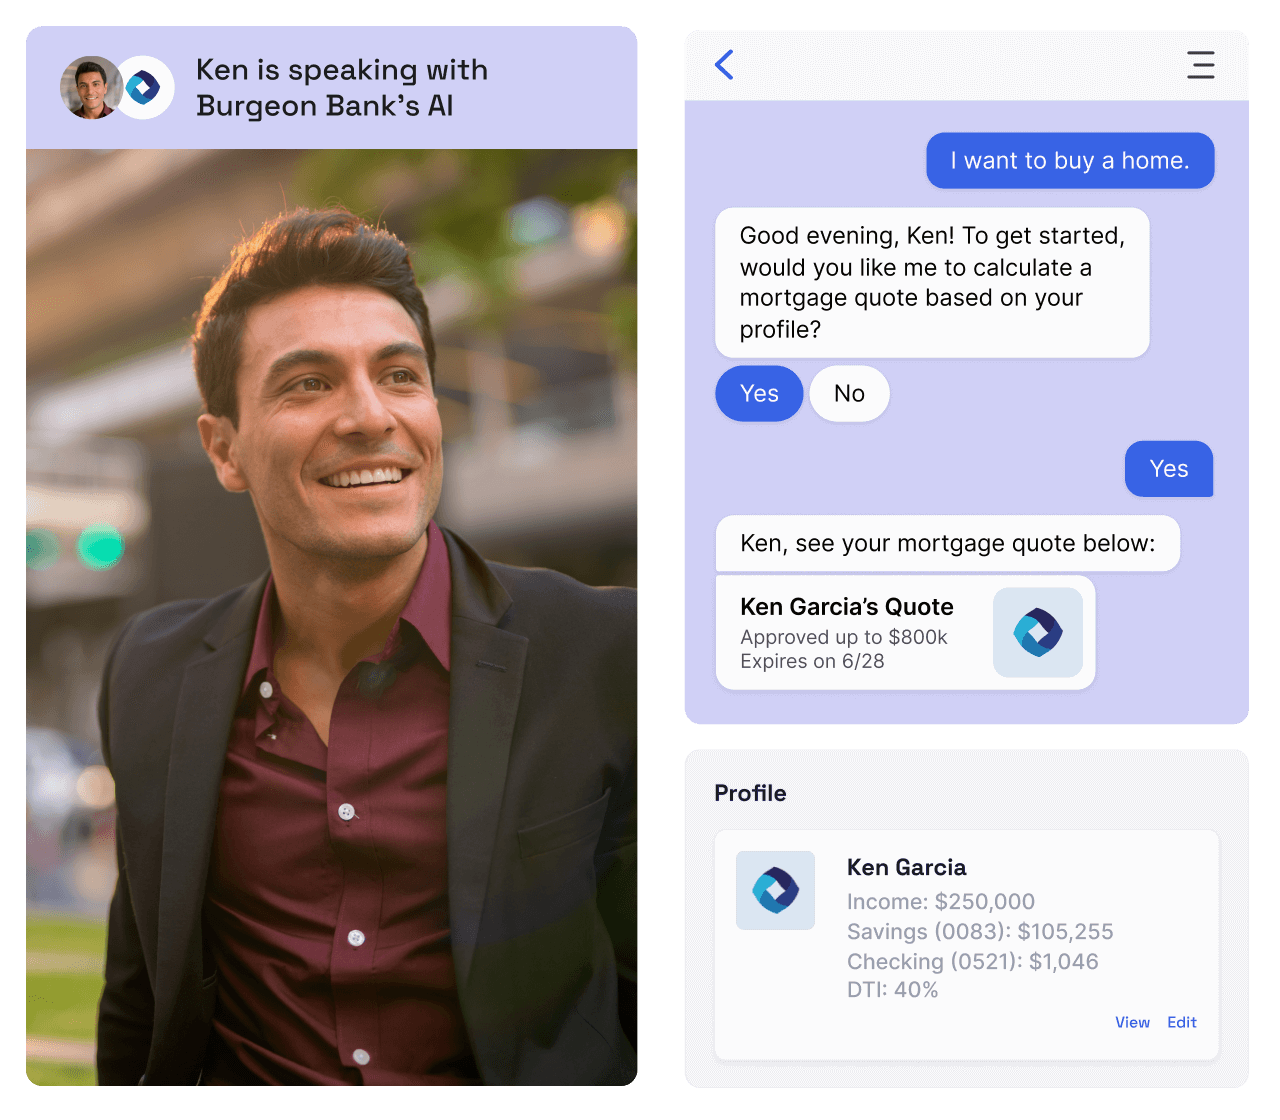 Conversational AI technology using natural language processing to understand a banking customer's need to buy a home and offer mortgage options via conversational interfaces